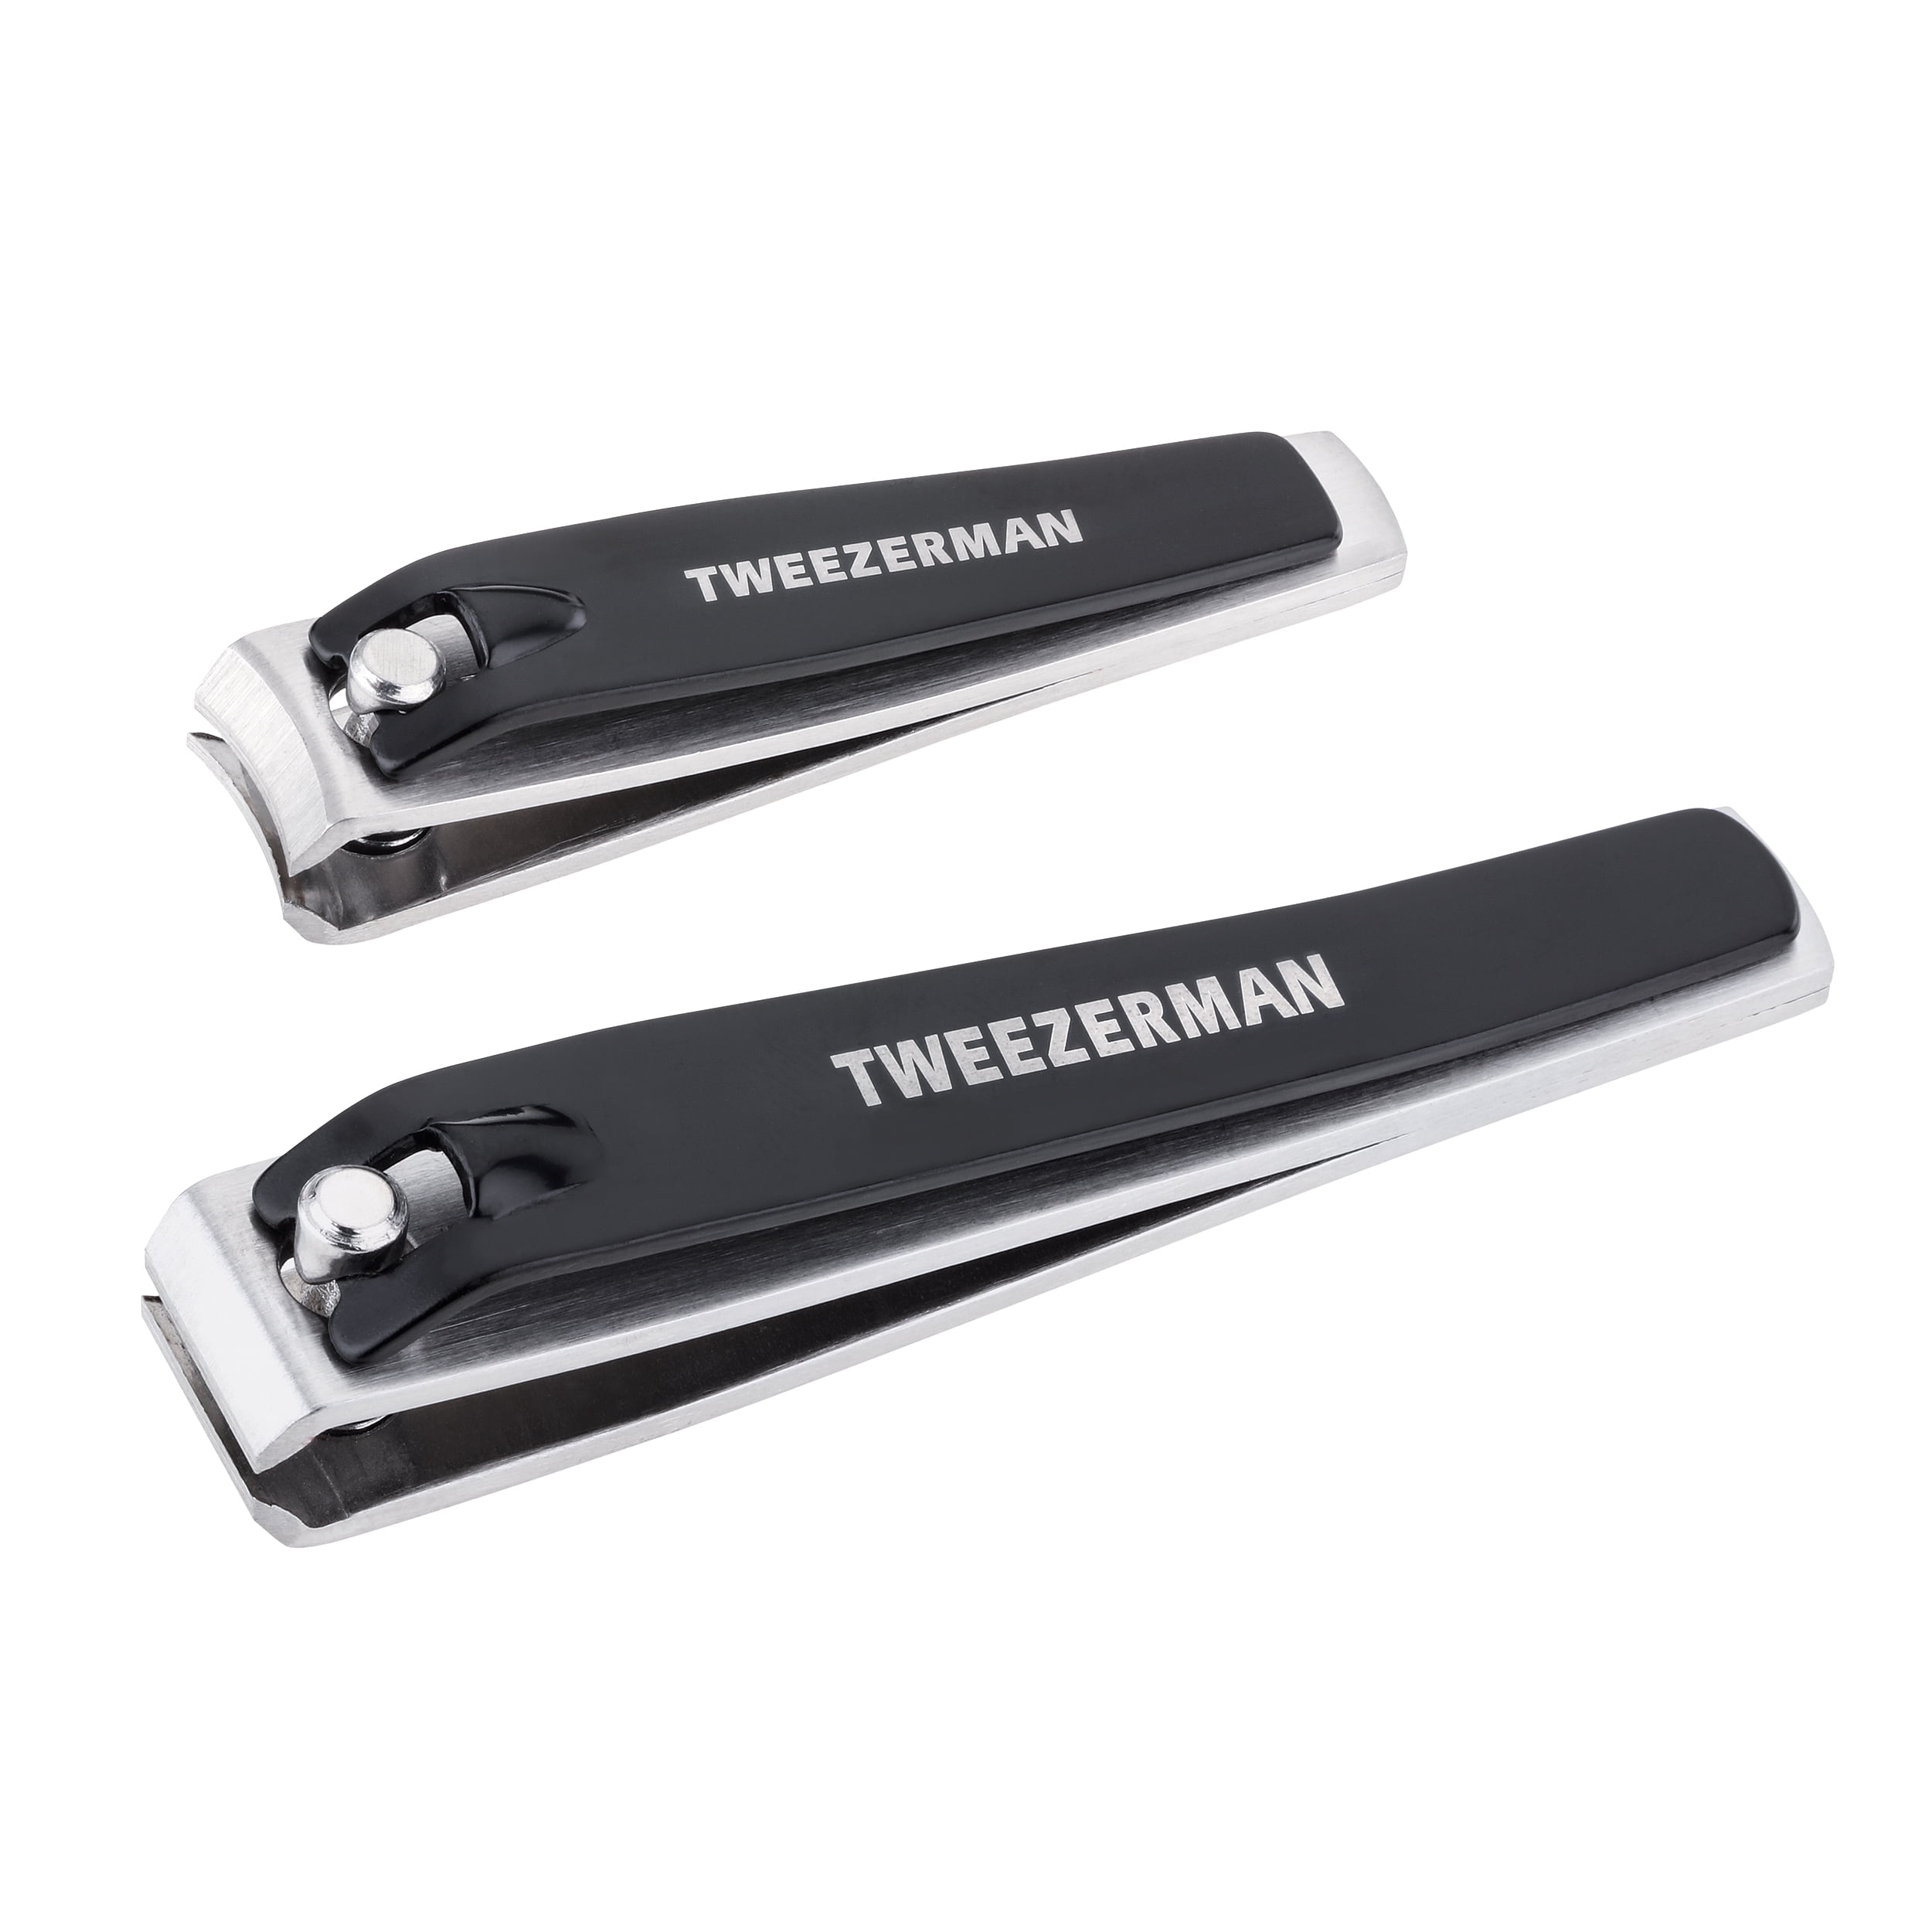 Tweezerman 2 Piece Stainless Steel Nail Clipper Set for Nail Care -  